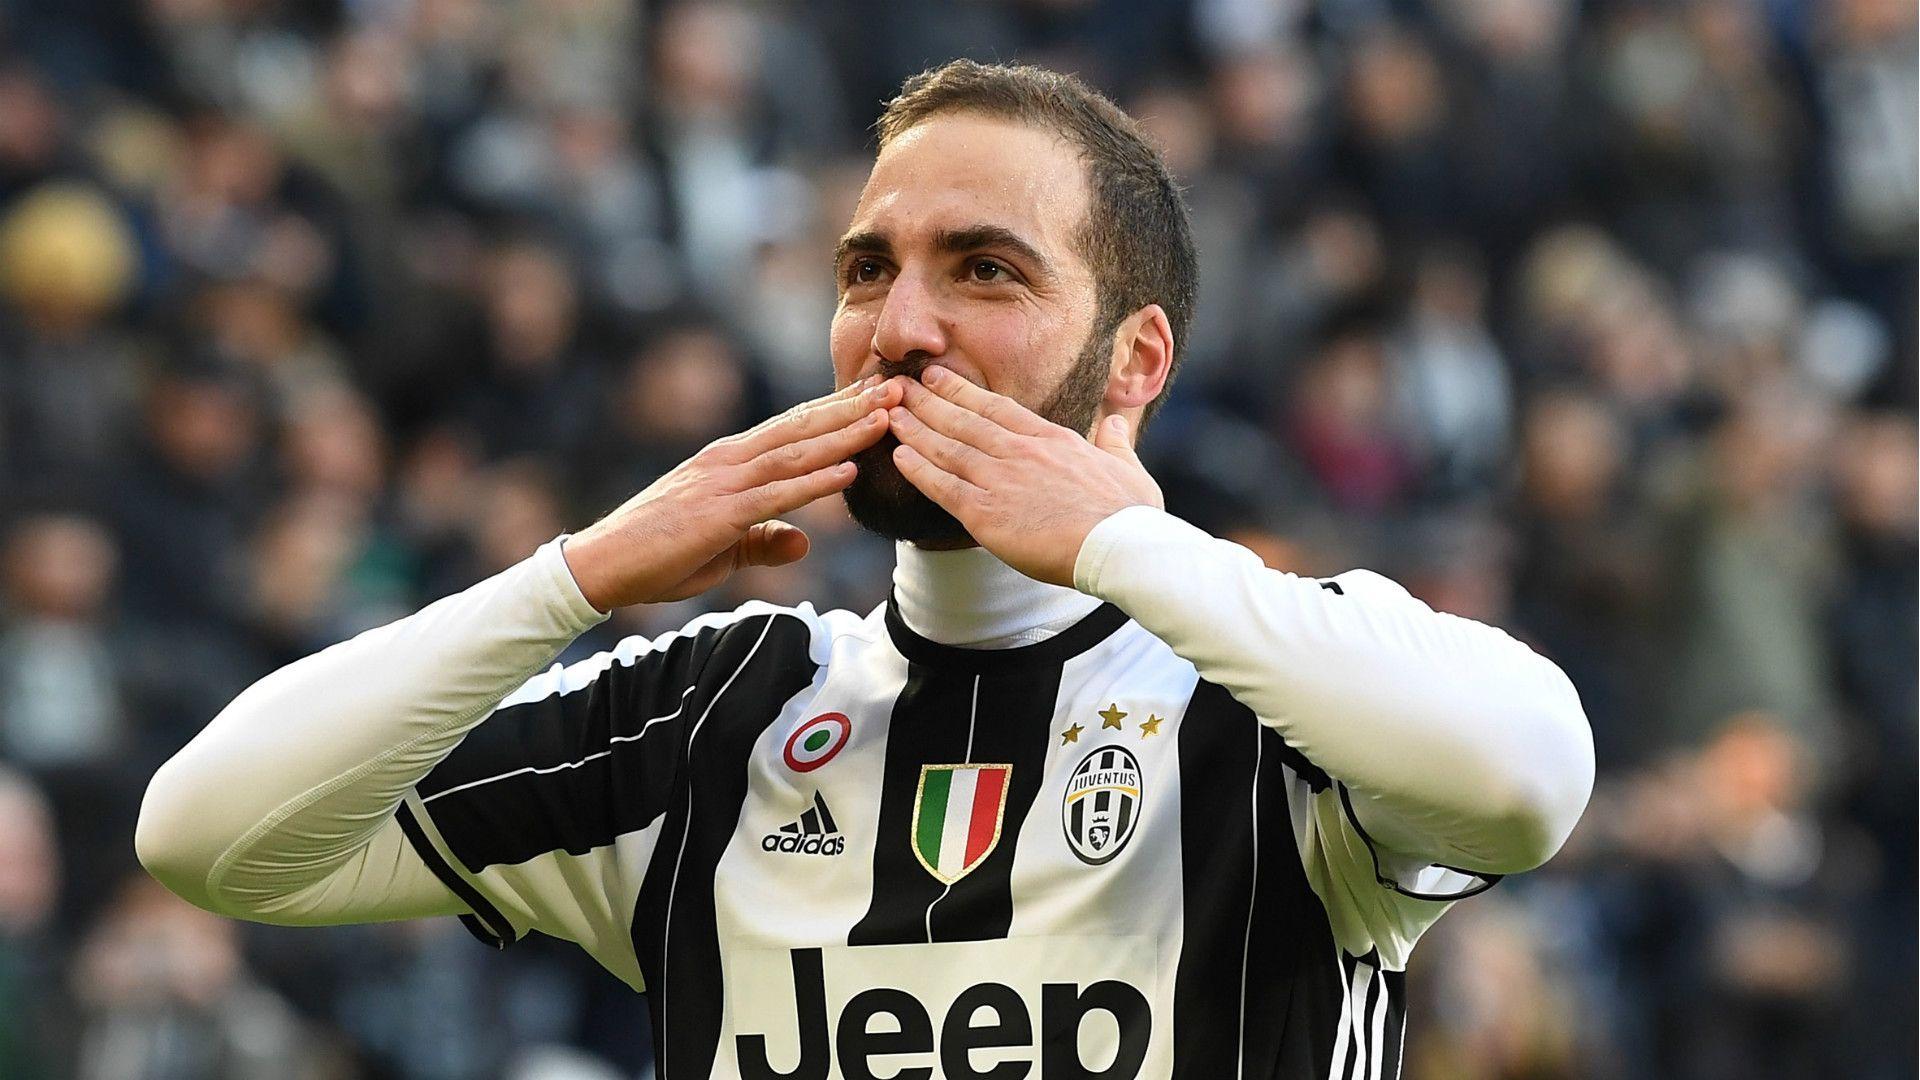 Higuain takes a swipe at Real Madrid: 'Juve don't whistle their own